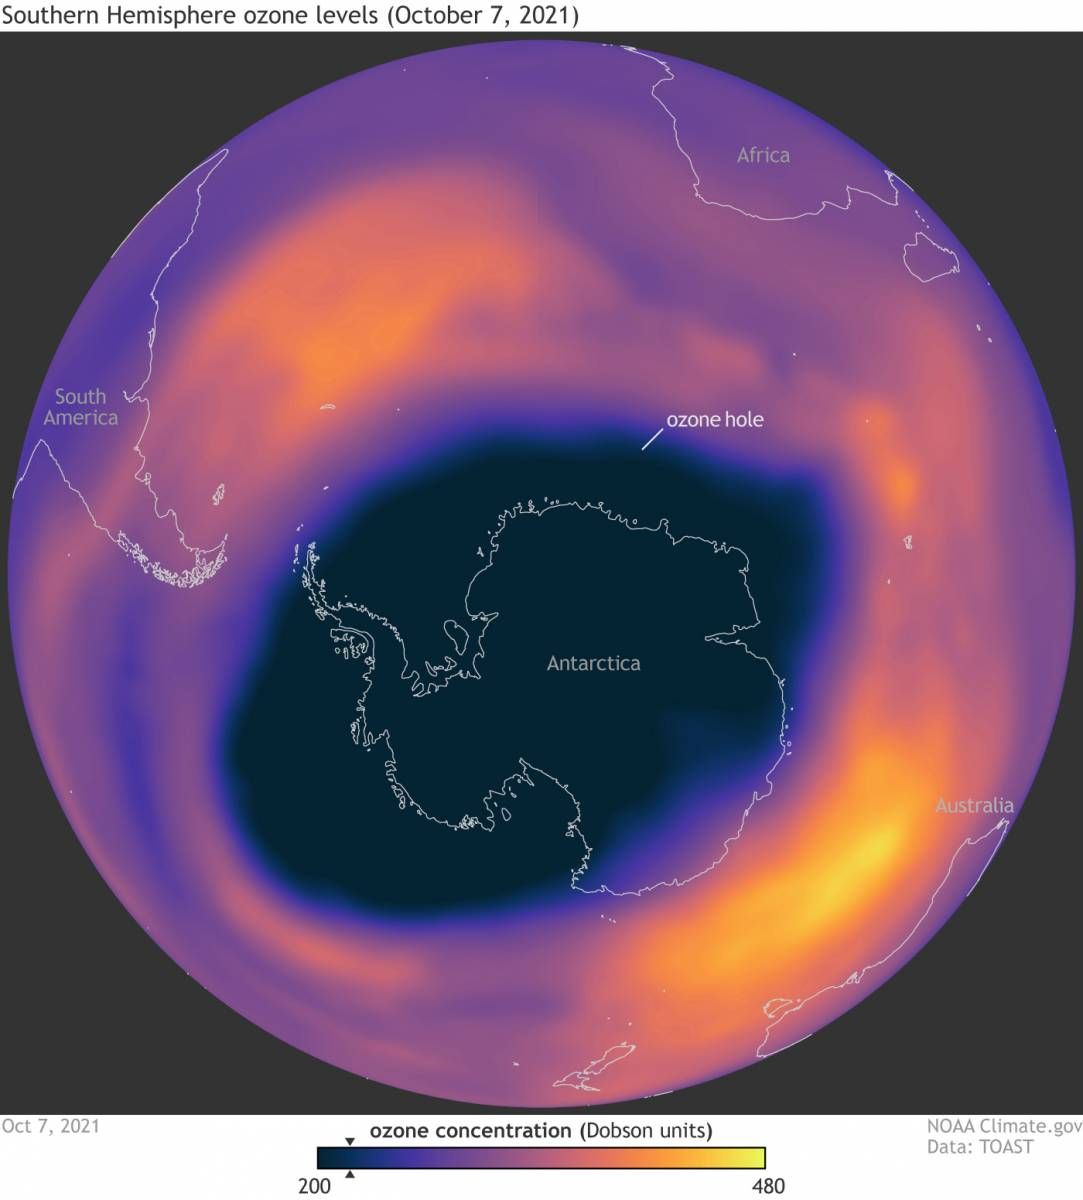 Map of globe showing the ozone hole over Antarctica. Higher ozone levels are shown to the north and colored as purple, pink, red, orange, and yellow.